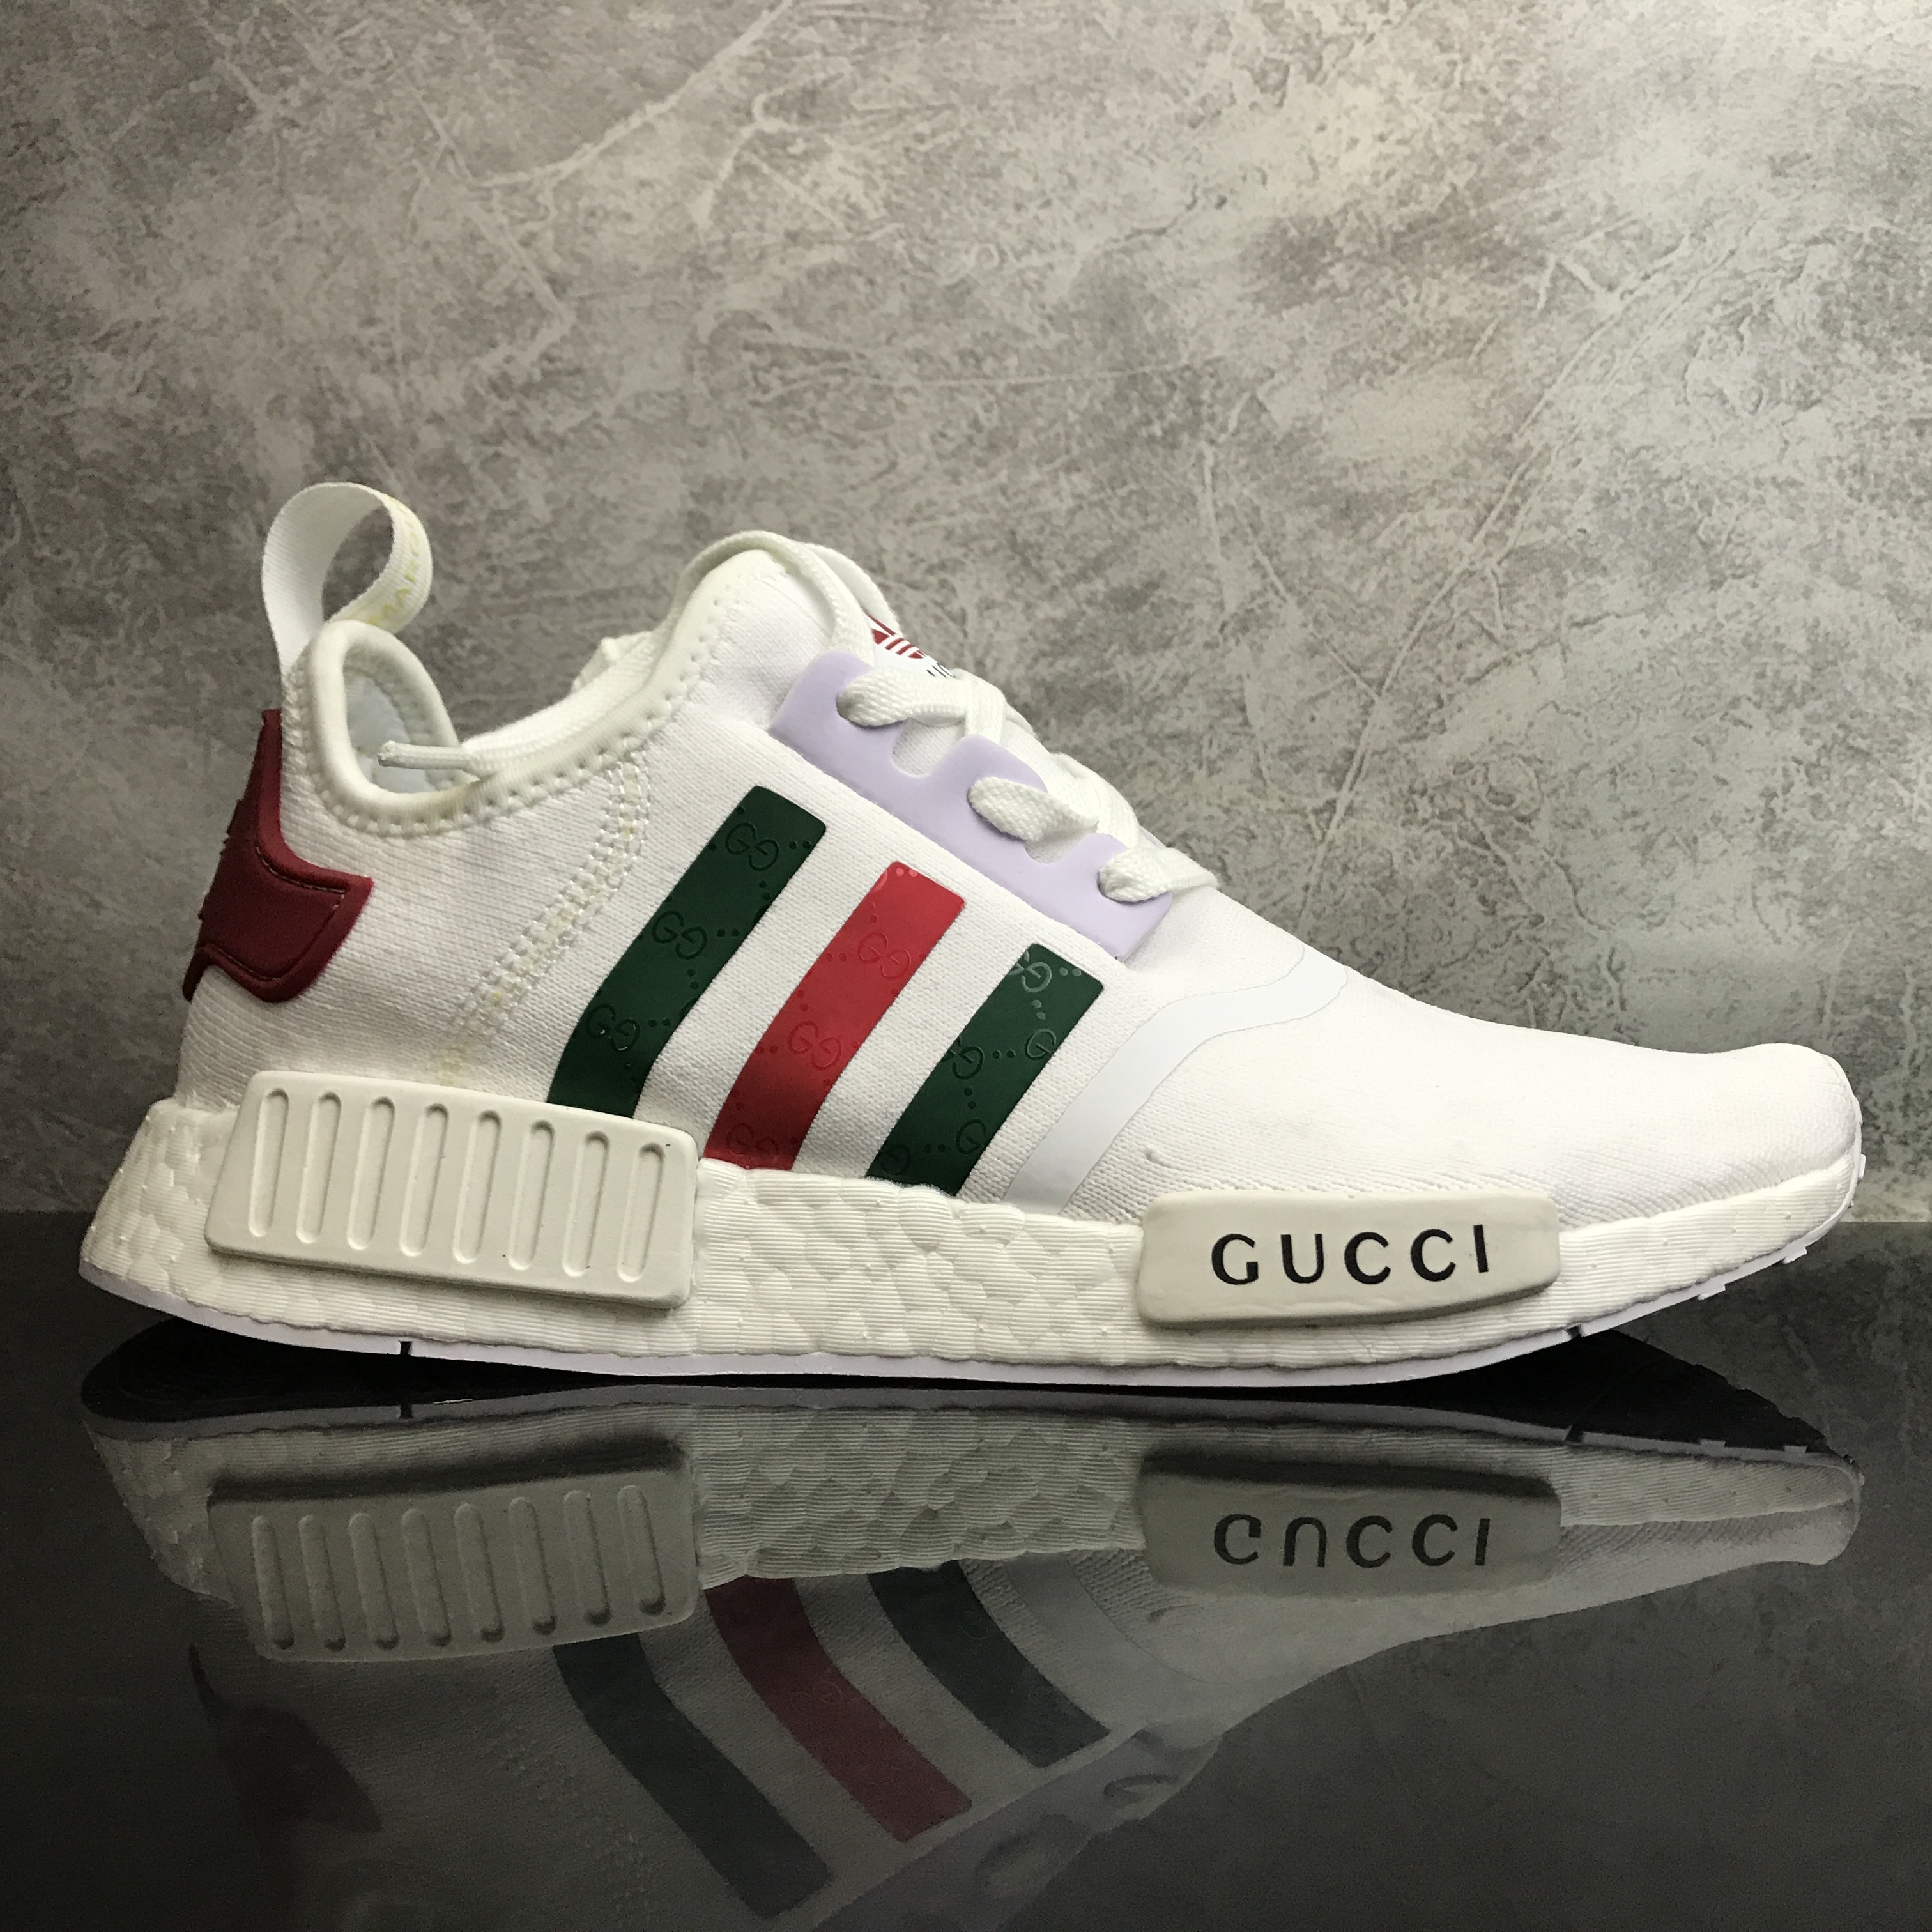 Gucci Sneaker Collection Gucci x Adidas NMD R1 Mesh Black from